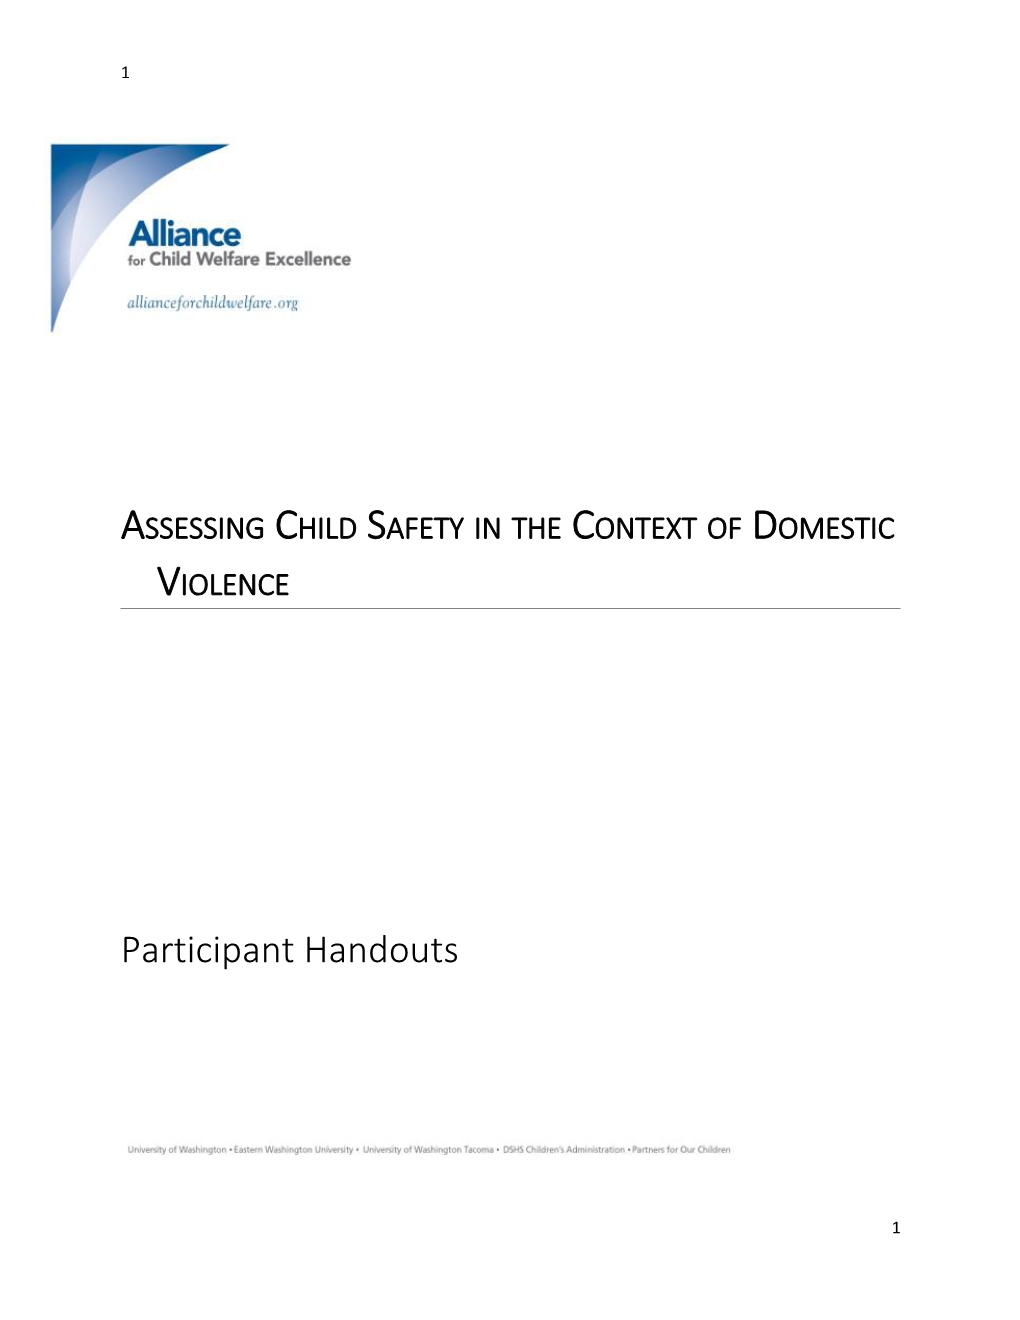 Assessing Child Safety in the Context of Domestic Violence